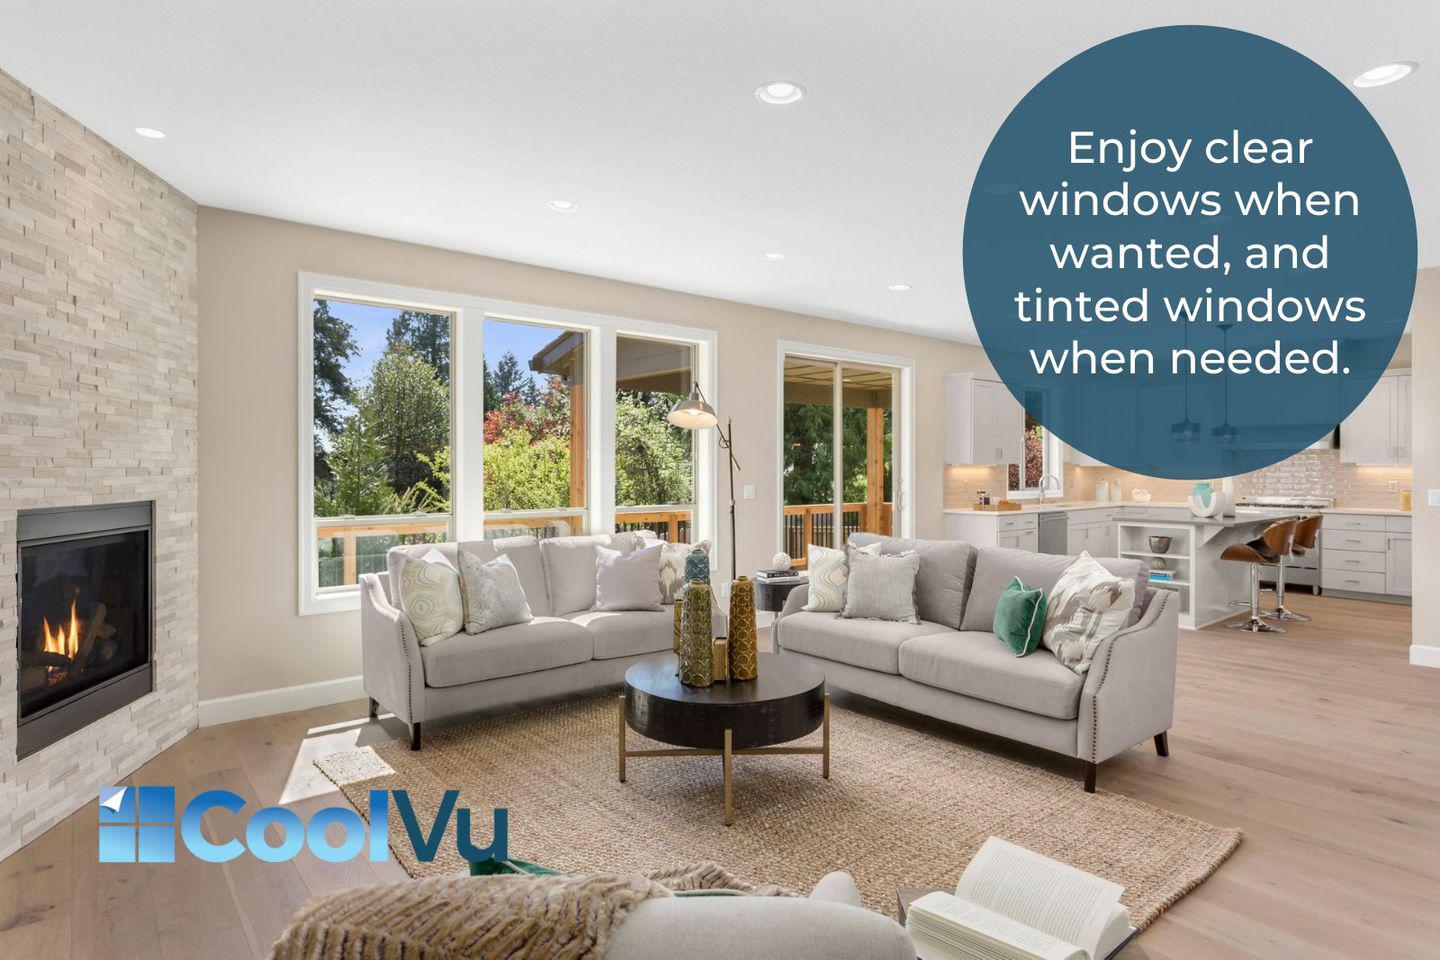 CoolVu Premium Window Films can block up to 50% of the sun’s heat, keeping homes cooler and more comfortable.